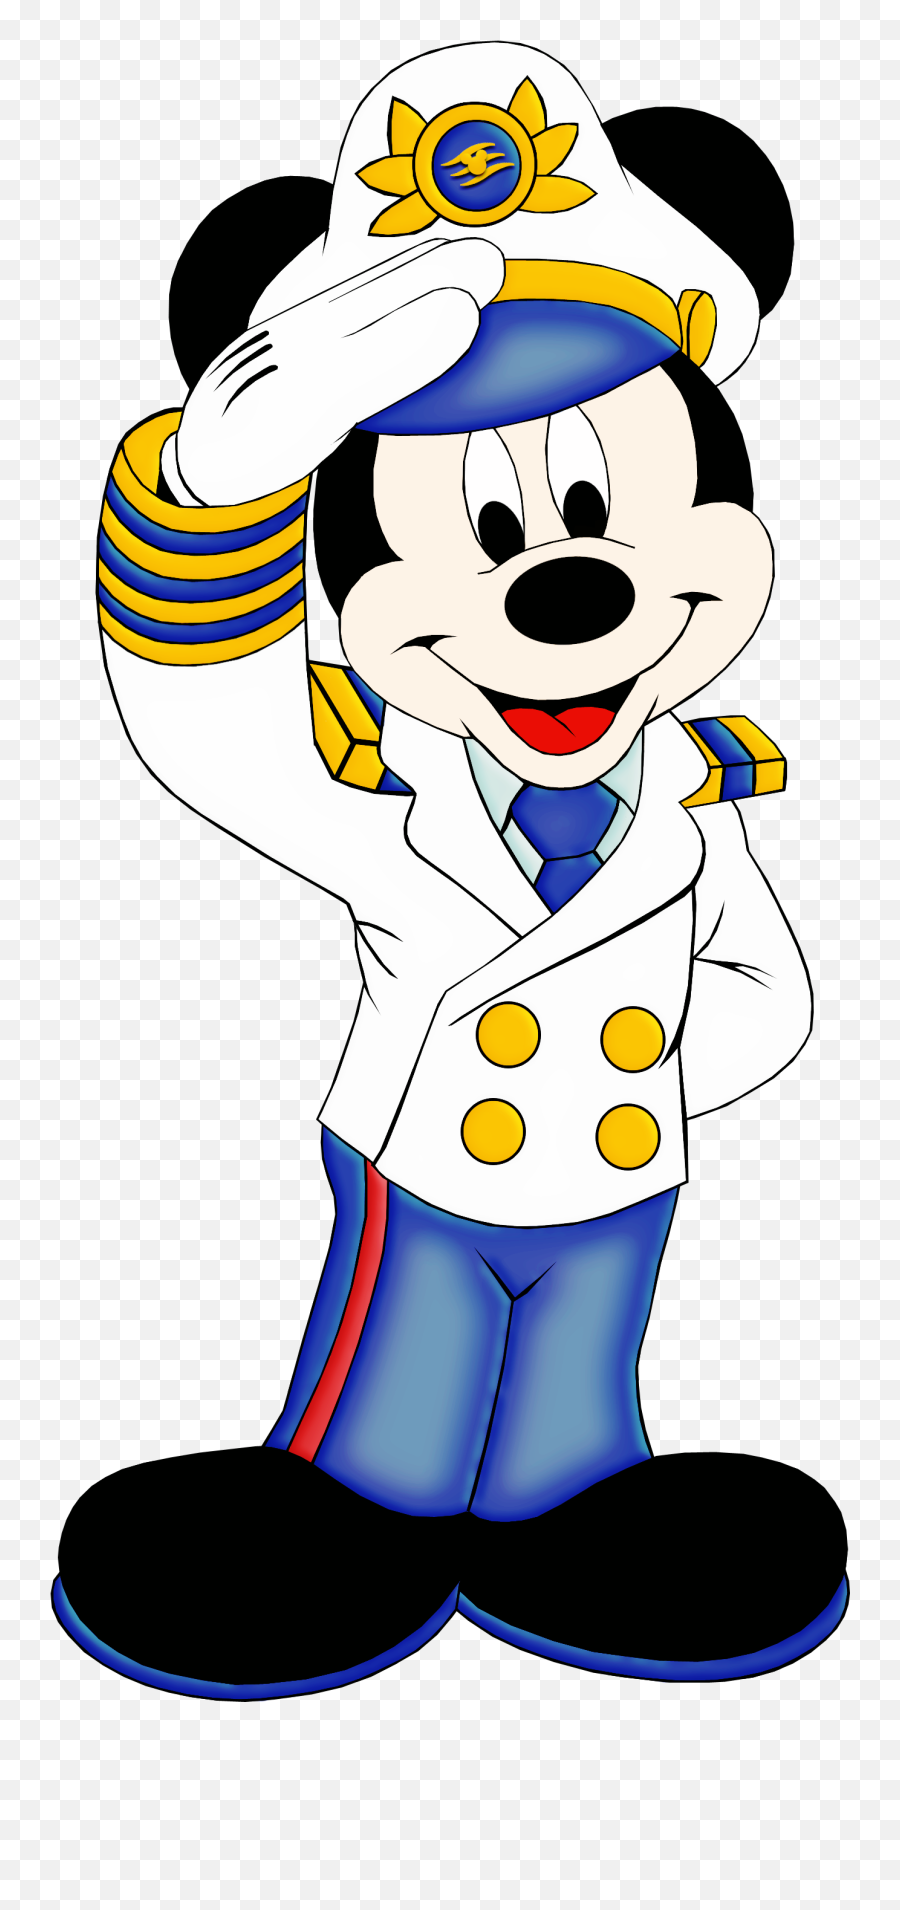 Mickey Mouse Clipart 4th July - Cruise Mickey Mouse Clipart Disney Cruise Mickey Emoji,Mickey Mouse Clipart